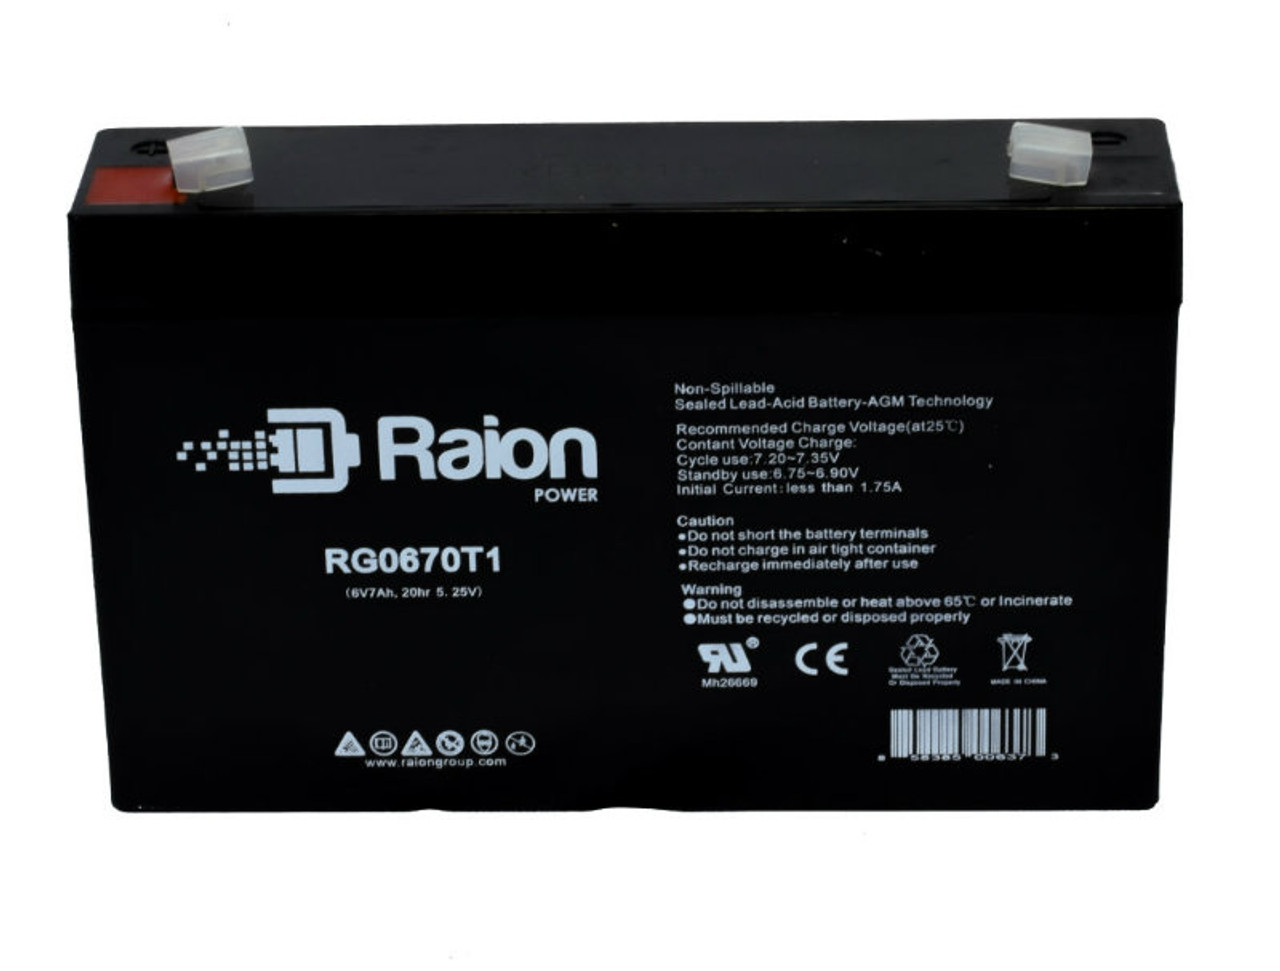 Raion Power RG0670T1 Replacement Battery Cartridge for Lionville Systems 600 Med Cart